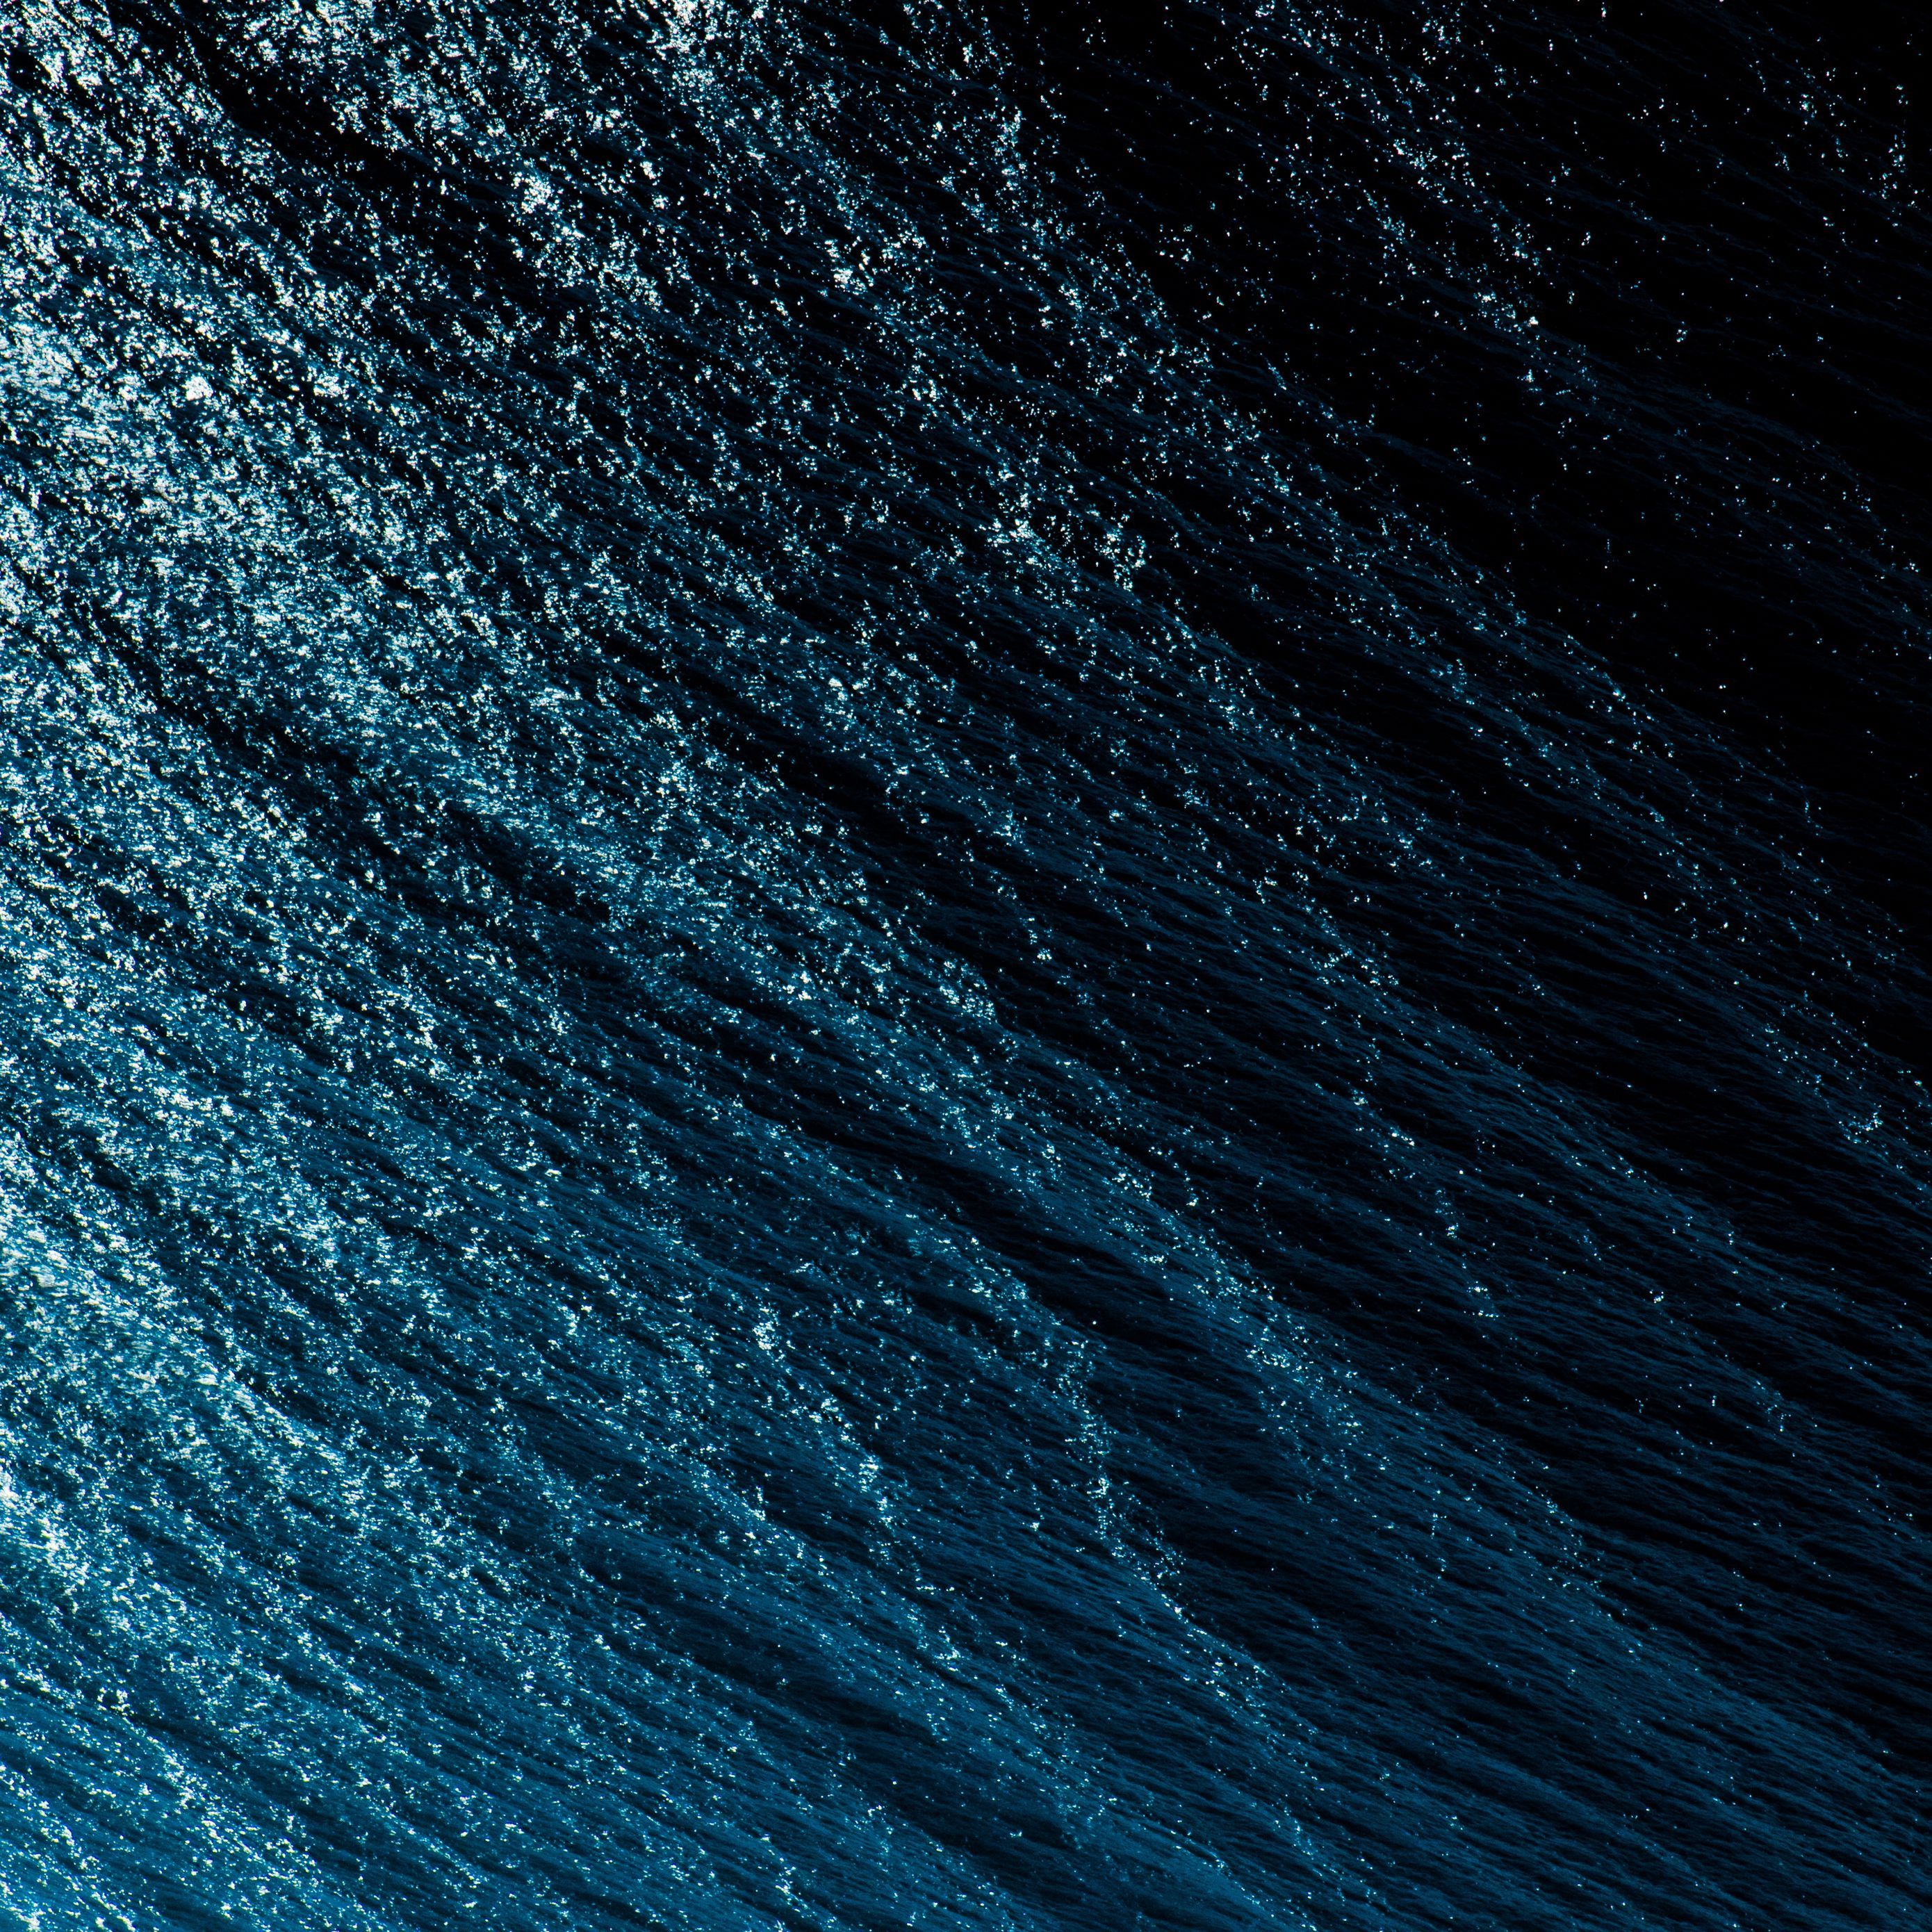 Download wallpaper 2780x2780 water, surface, spray ipad air, ipad air ipad ipad ipad mini ipad mini ipad mini ipad pro 9.7 for parallax HD background